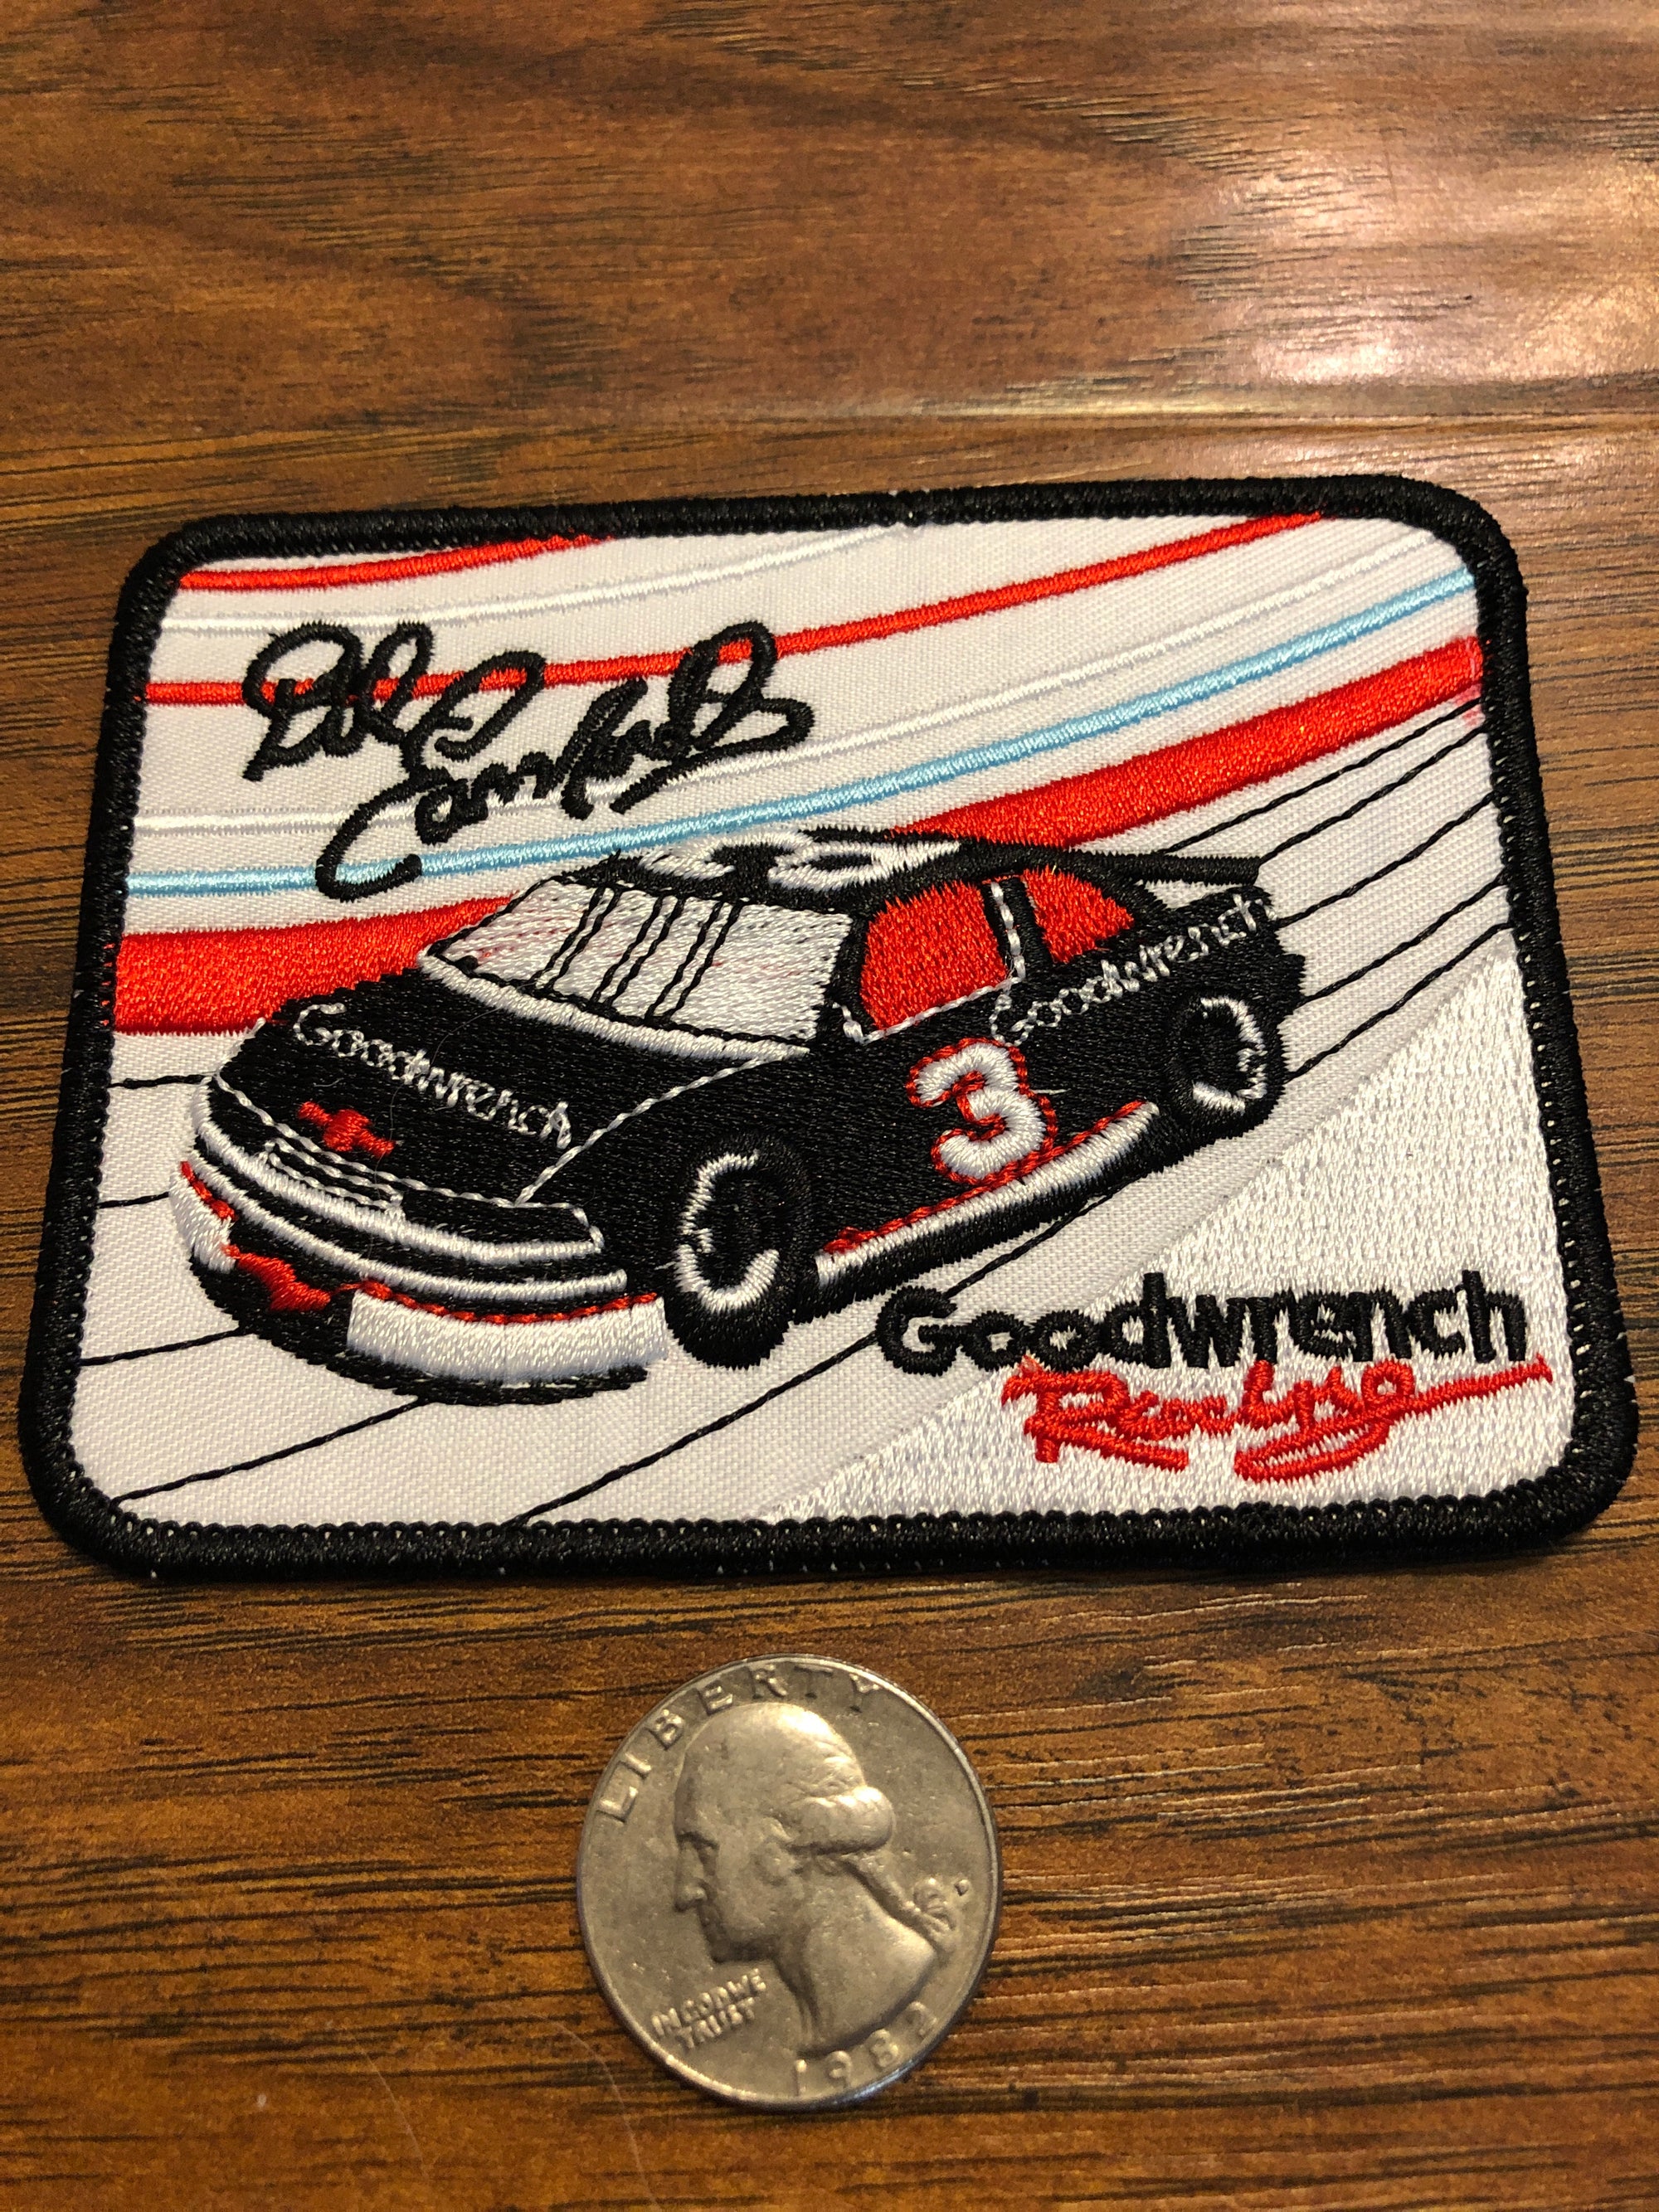 Dale Earnhardt Goodwrench